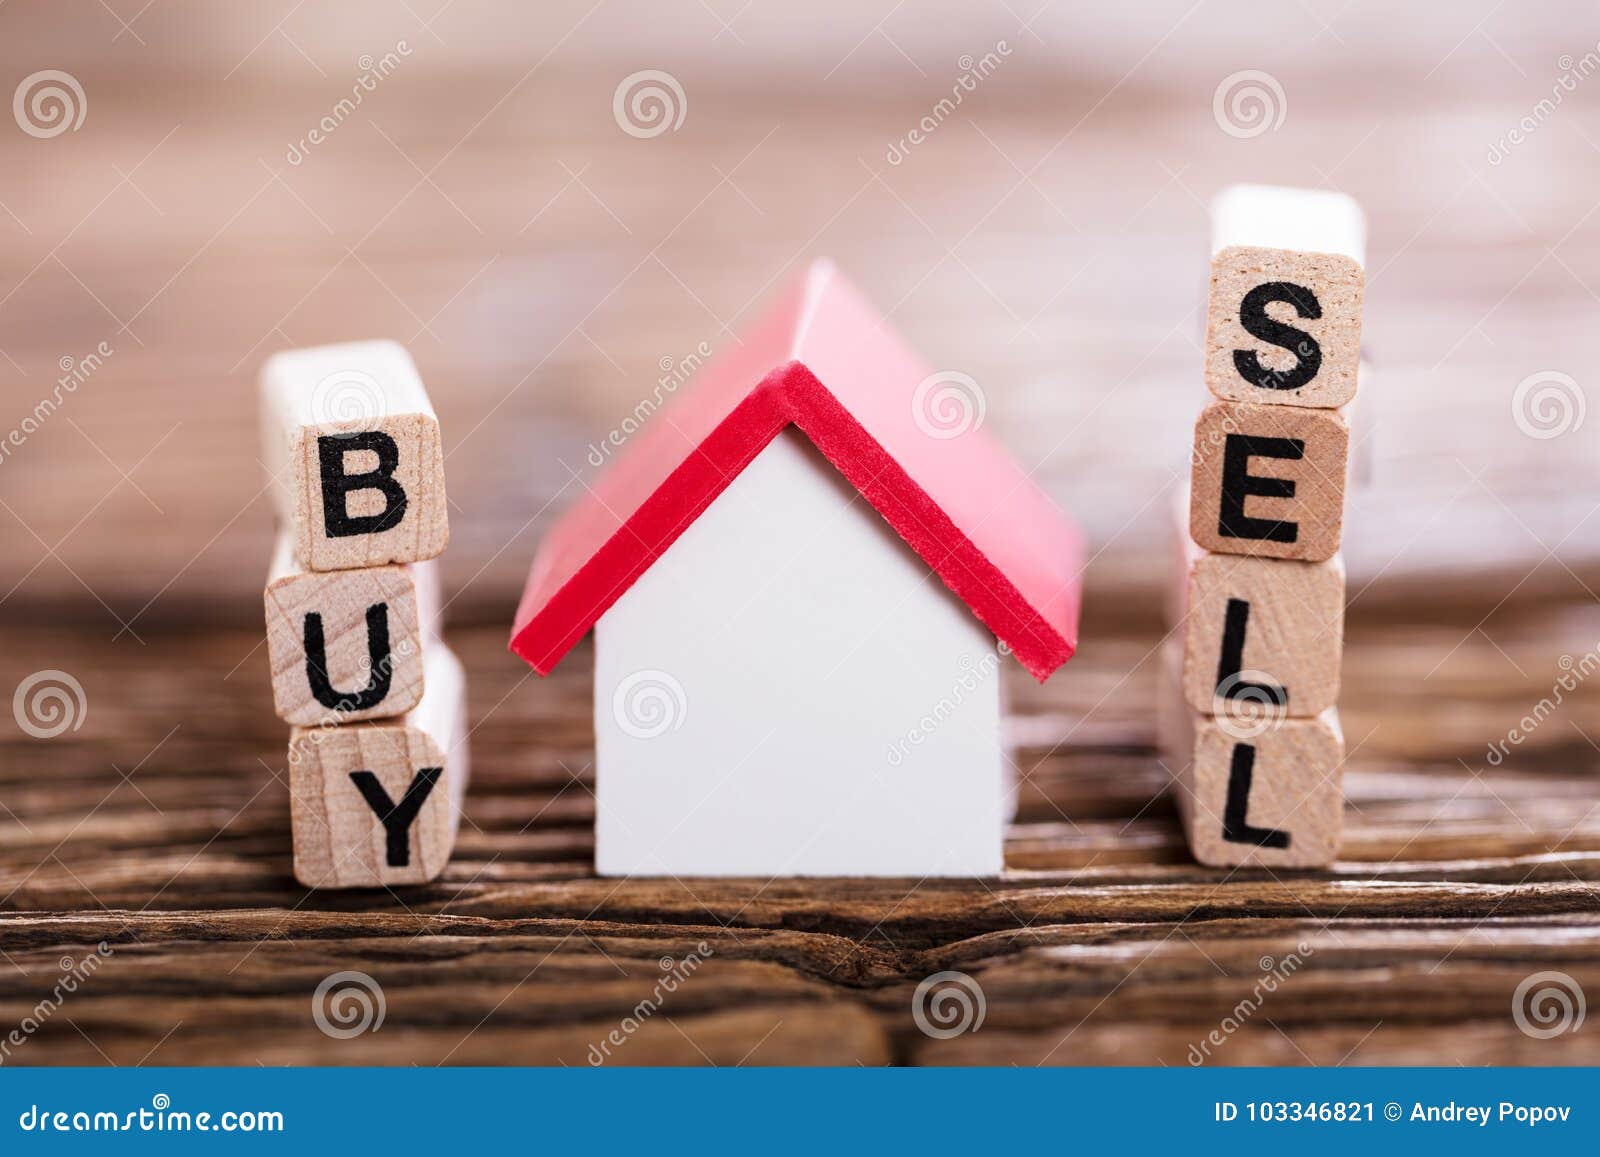 buy or sell option with small house model